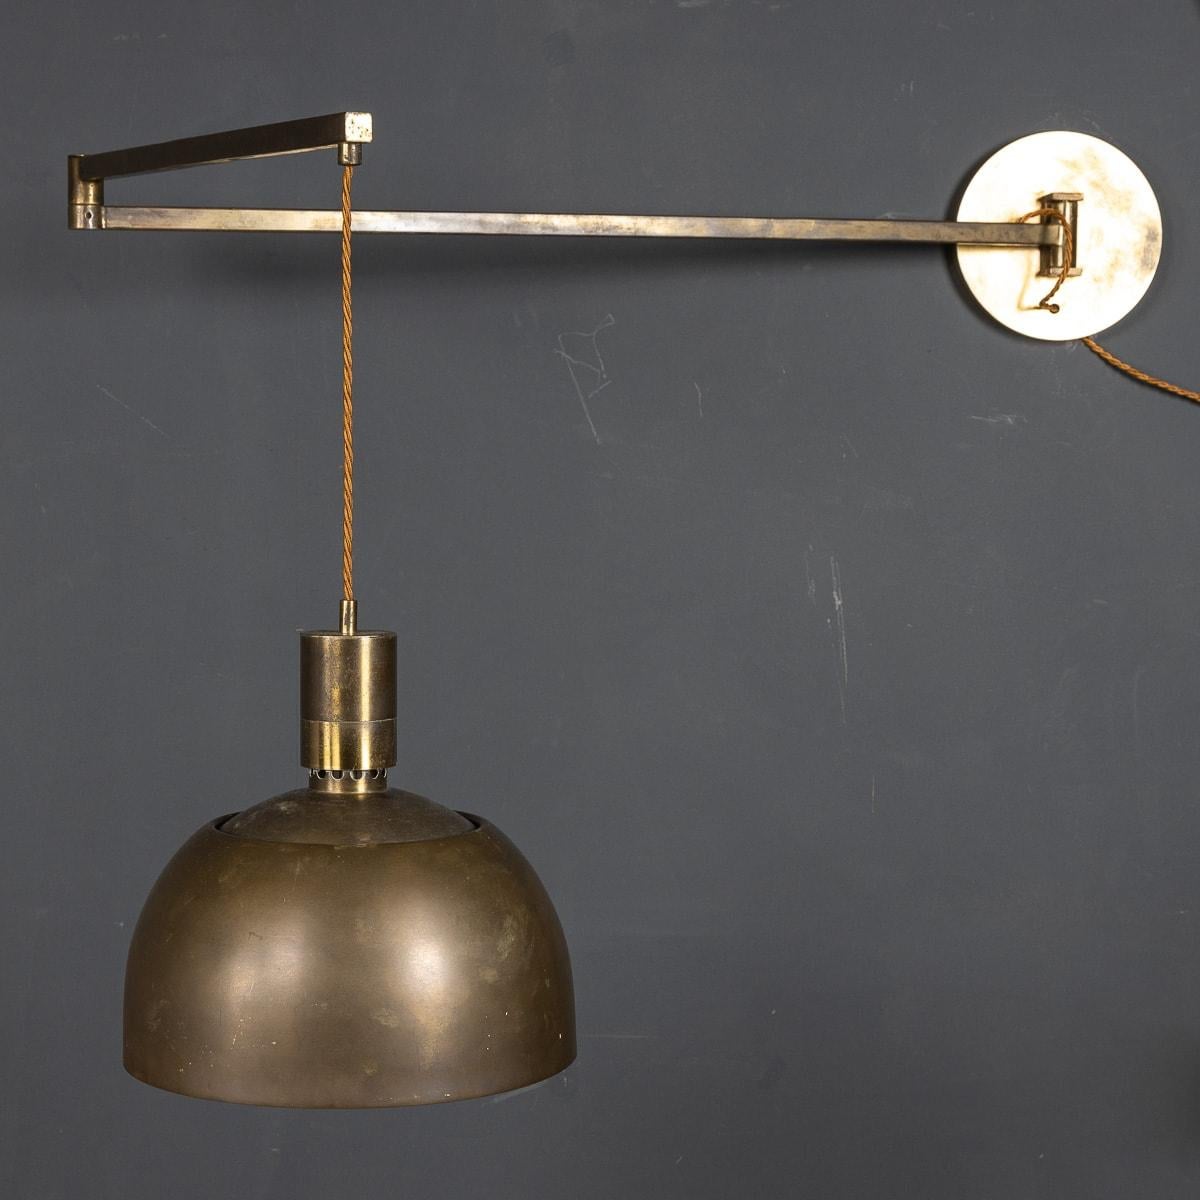 Pair of Italian Brass Articulated Wall Lights by Albini & Helg, c.1960 In Good Condition For Sale In Royal Tunbridge Wells, Kent